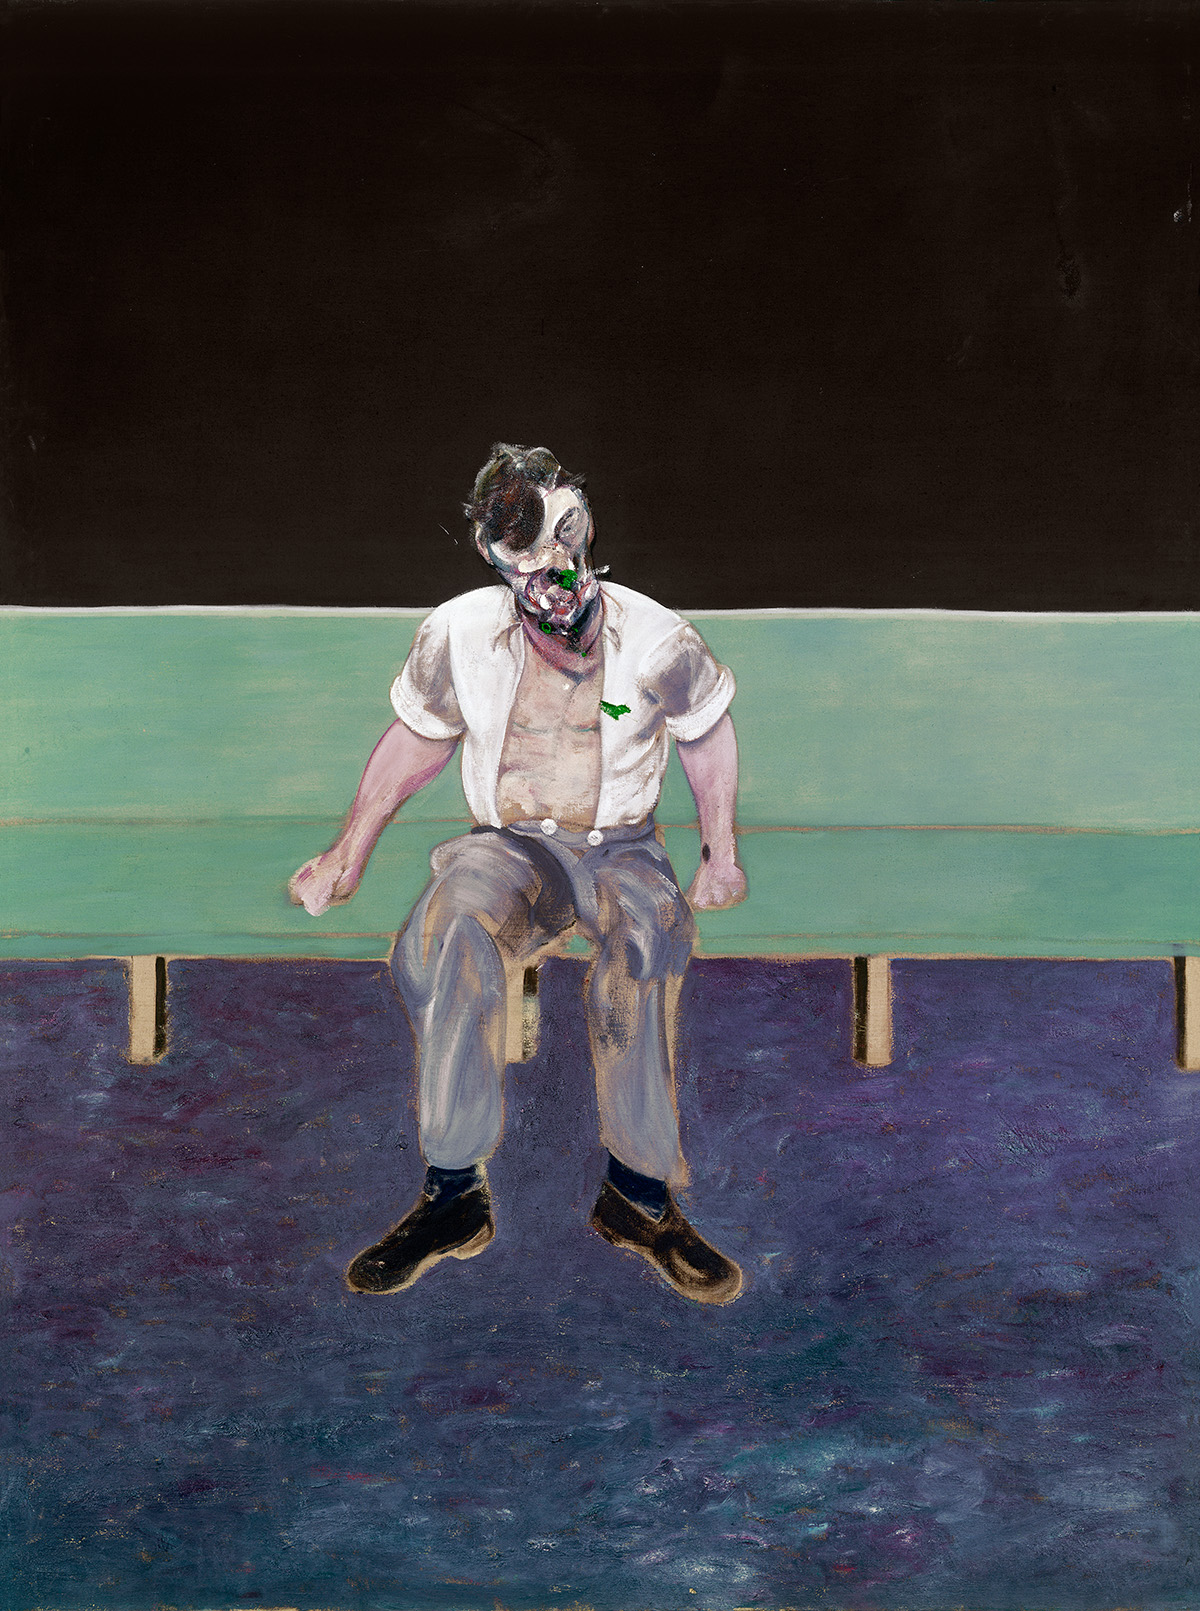 Study for Portrait of Lucian Freud, 1964. Oil on canvas. CR no. 64-06. © The Estate of Francis Bacon / DACS London 2022. All rights reserved.